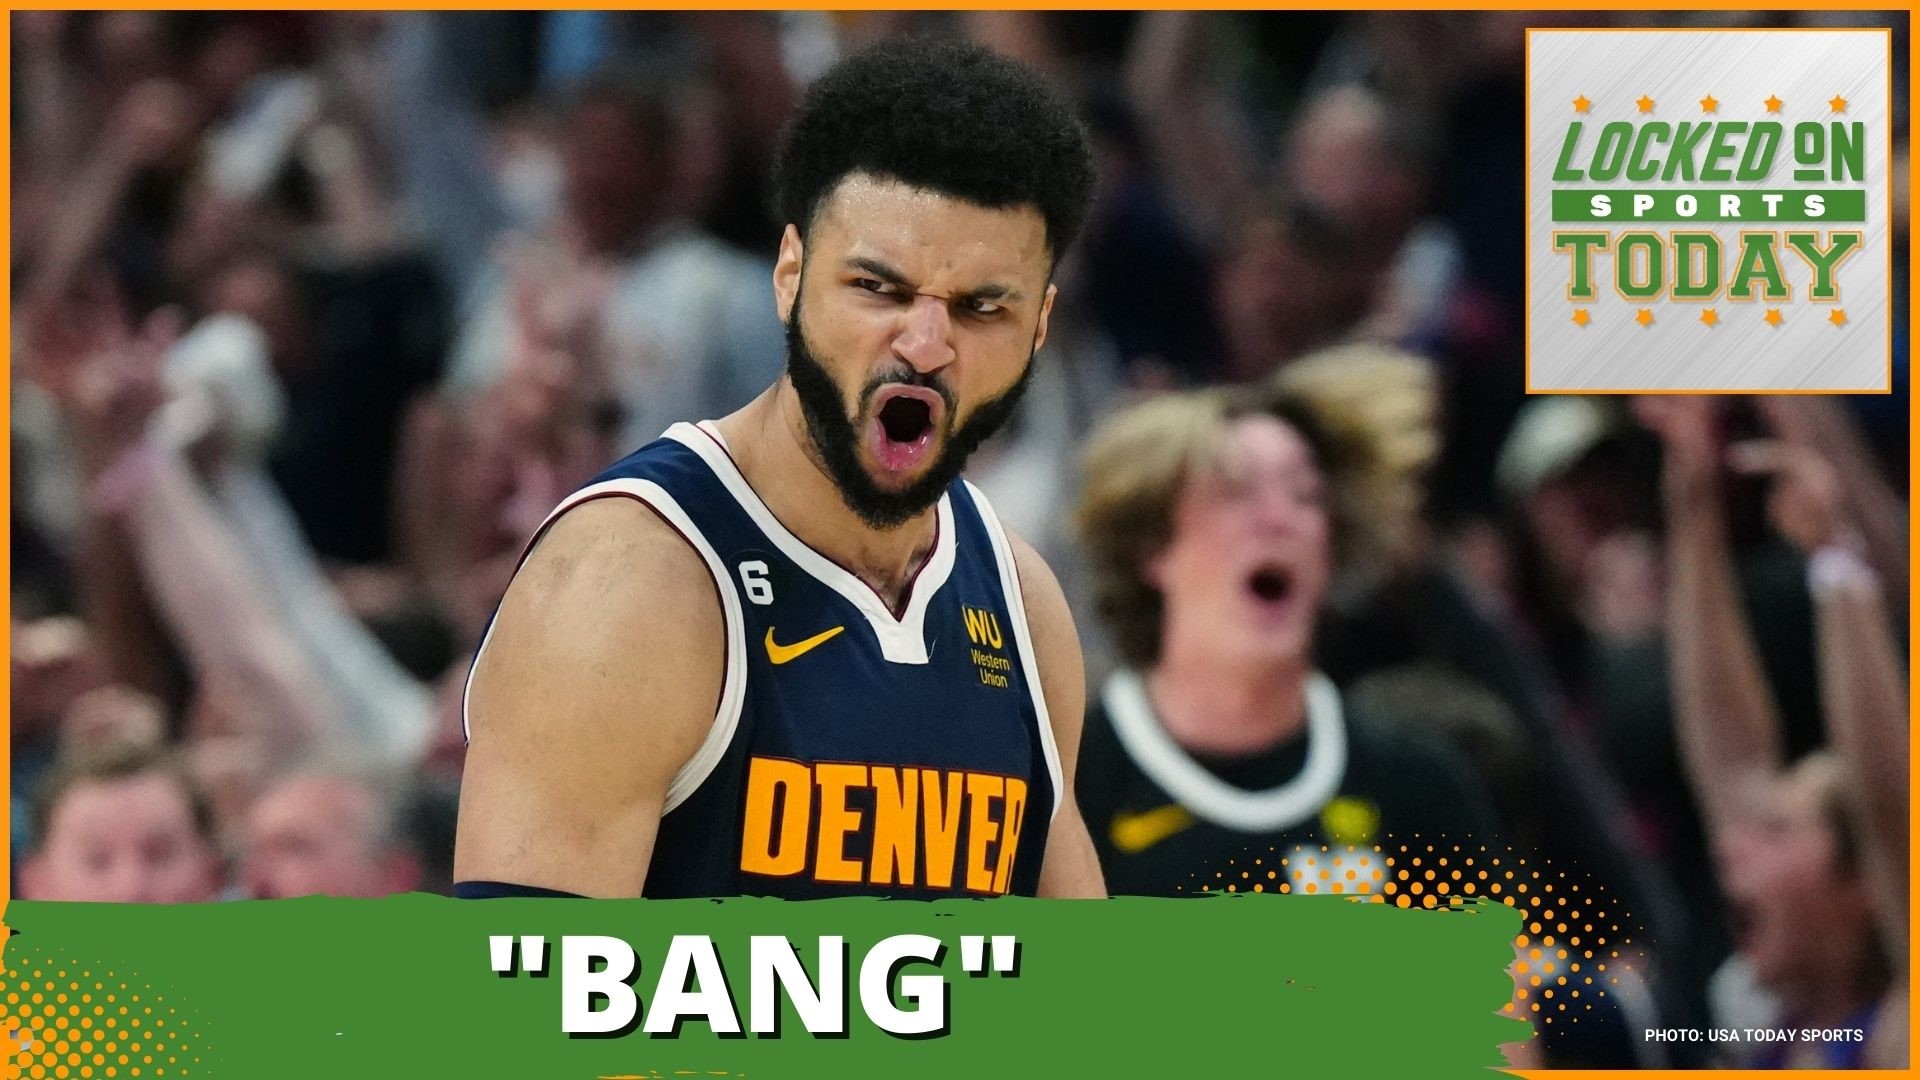 Discussing the day's top sports stories from the Denver Nuggets taking a lead over the Lakers to the New York Giants still negotiating with a star player.